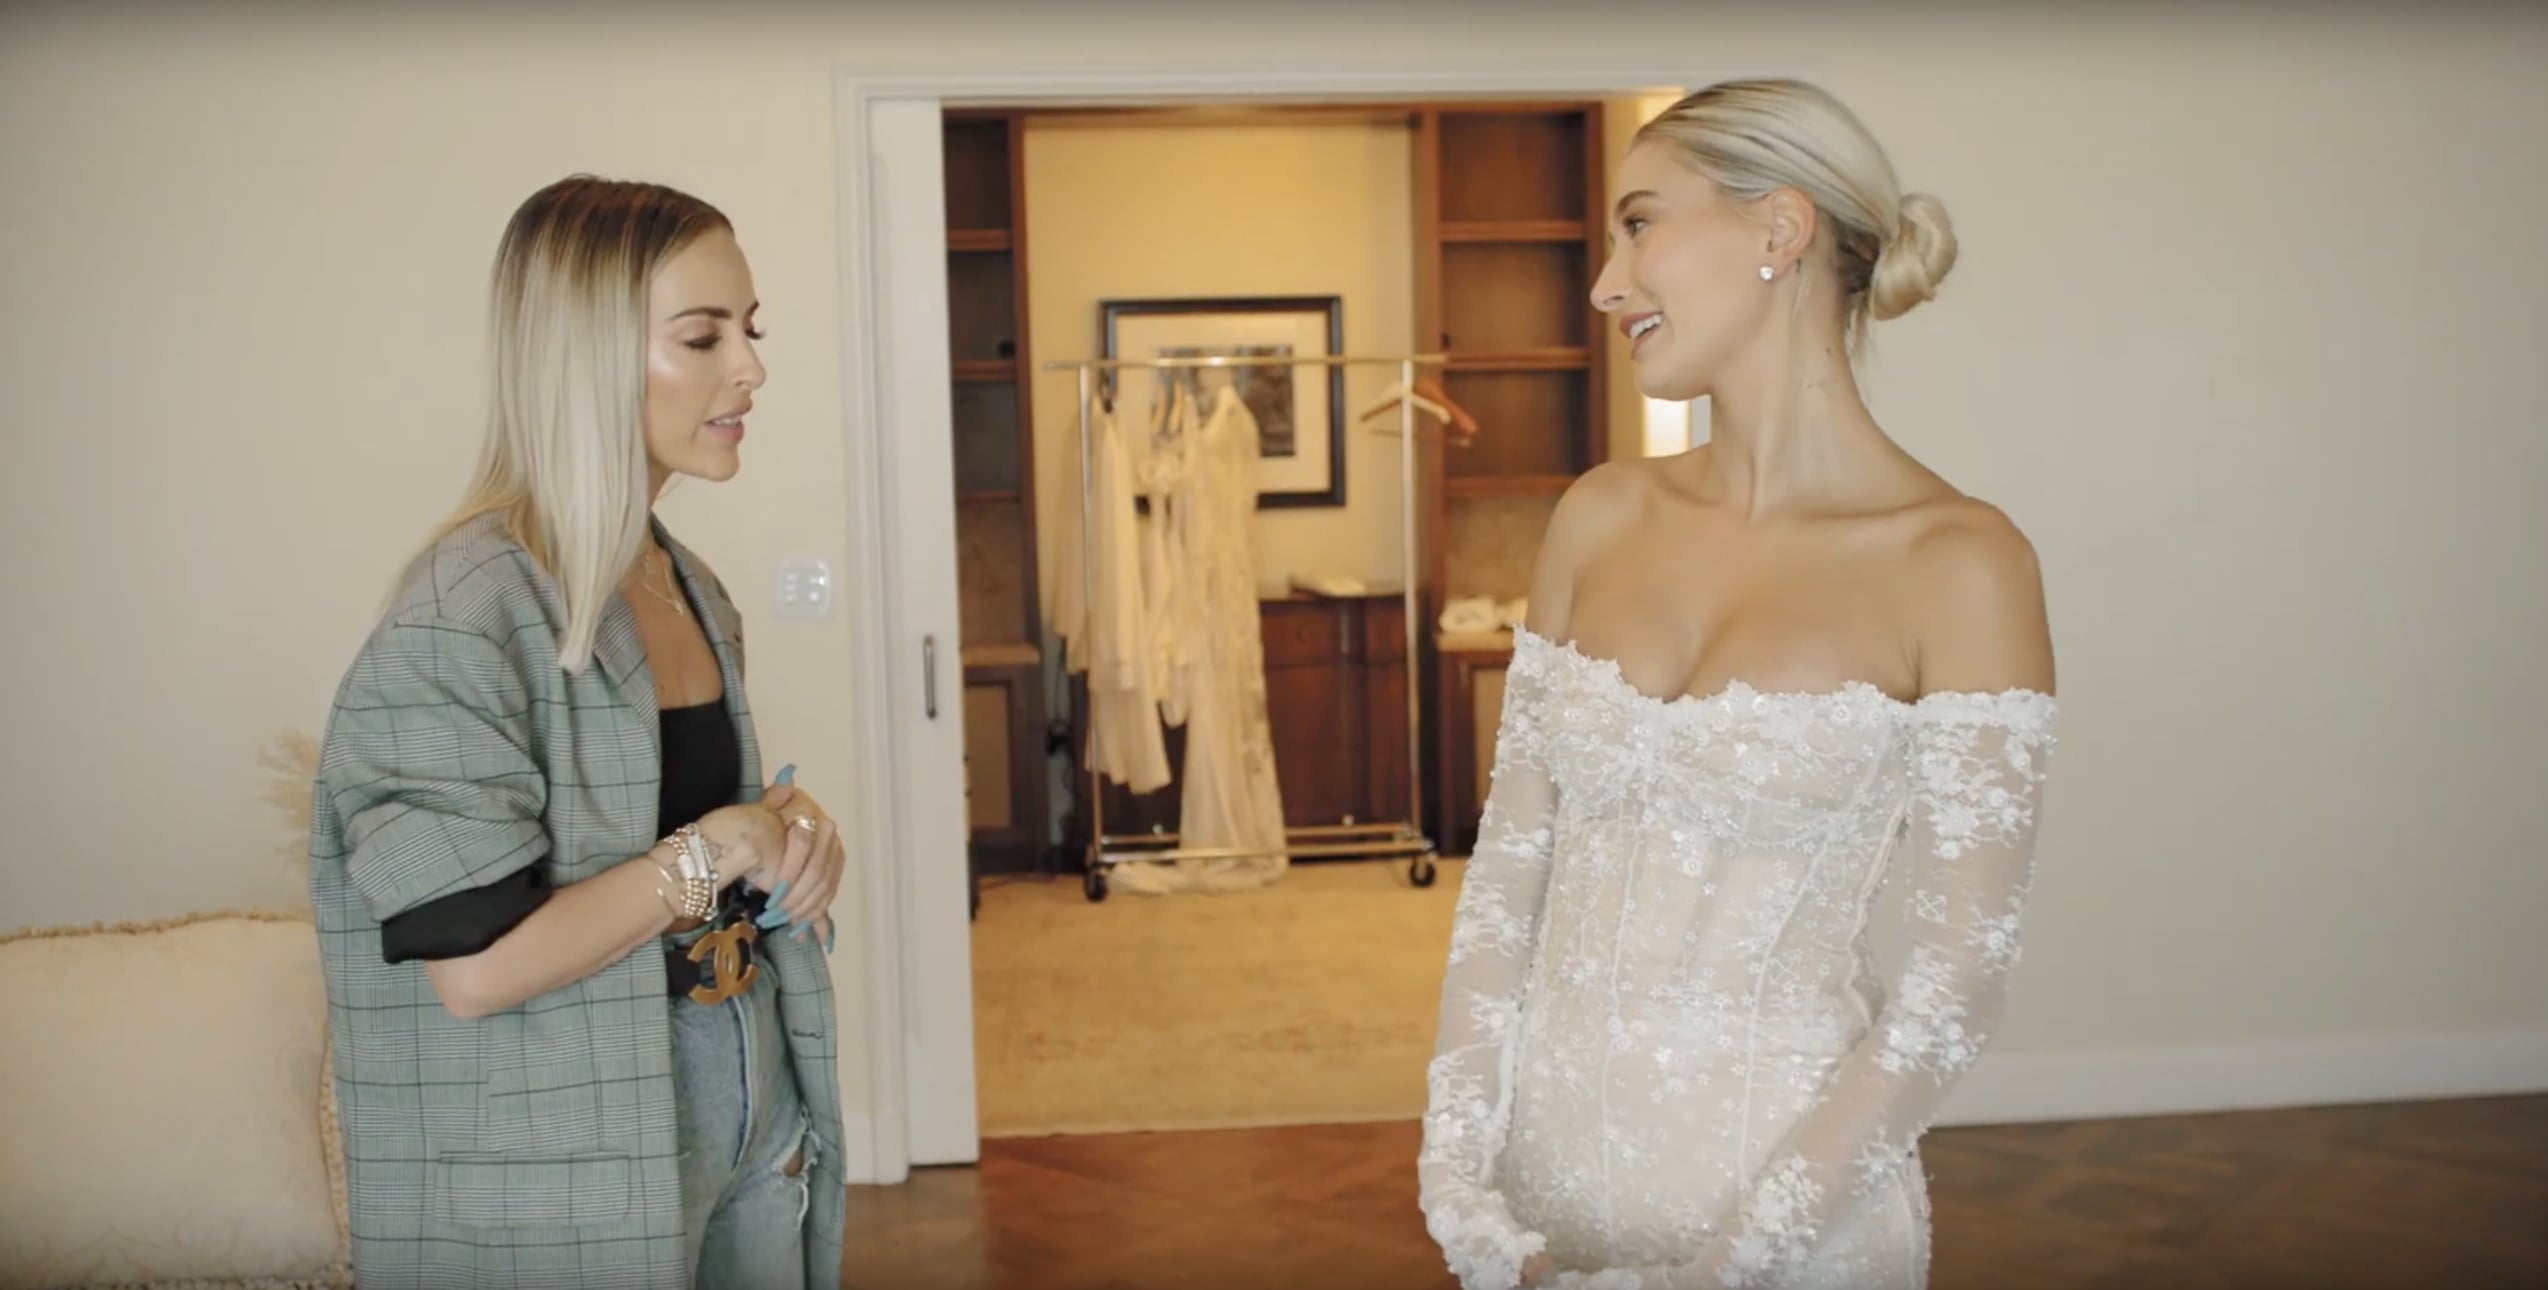 Hailey Bieber's Post-Bridal Wardrobe Is Perfectly Fitting For A Newlywed